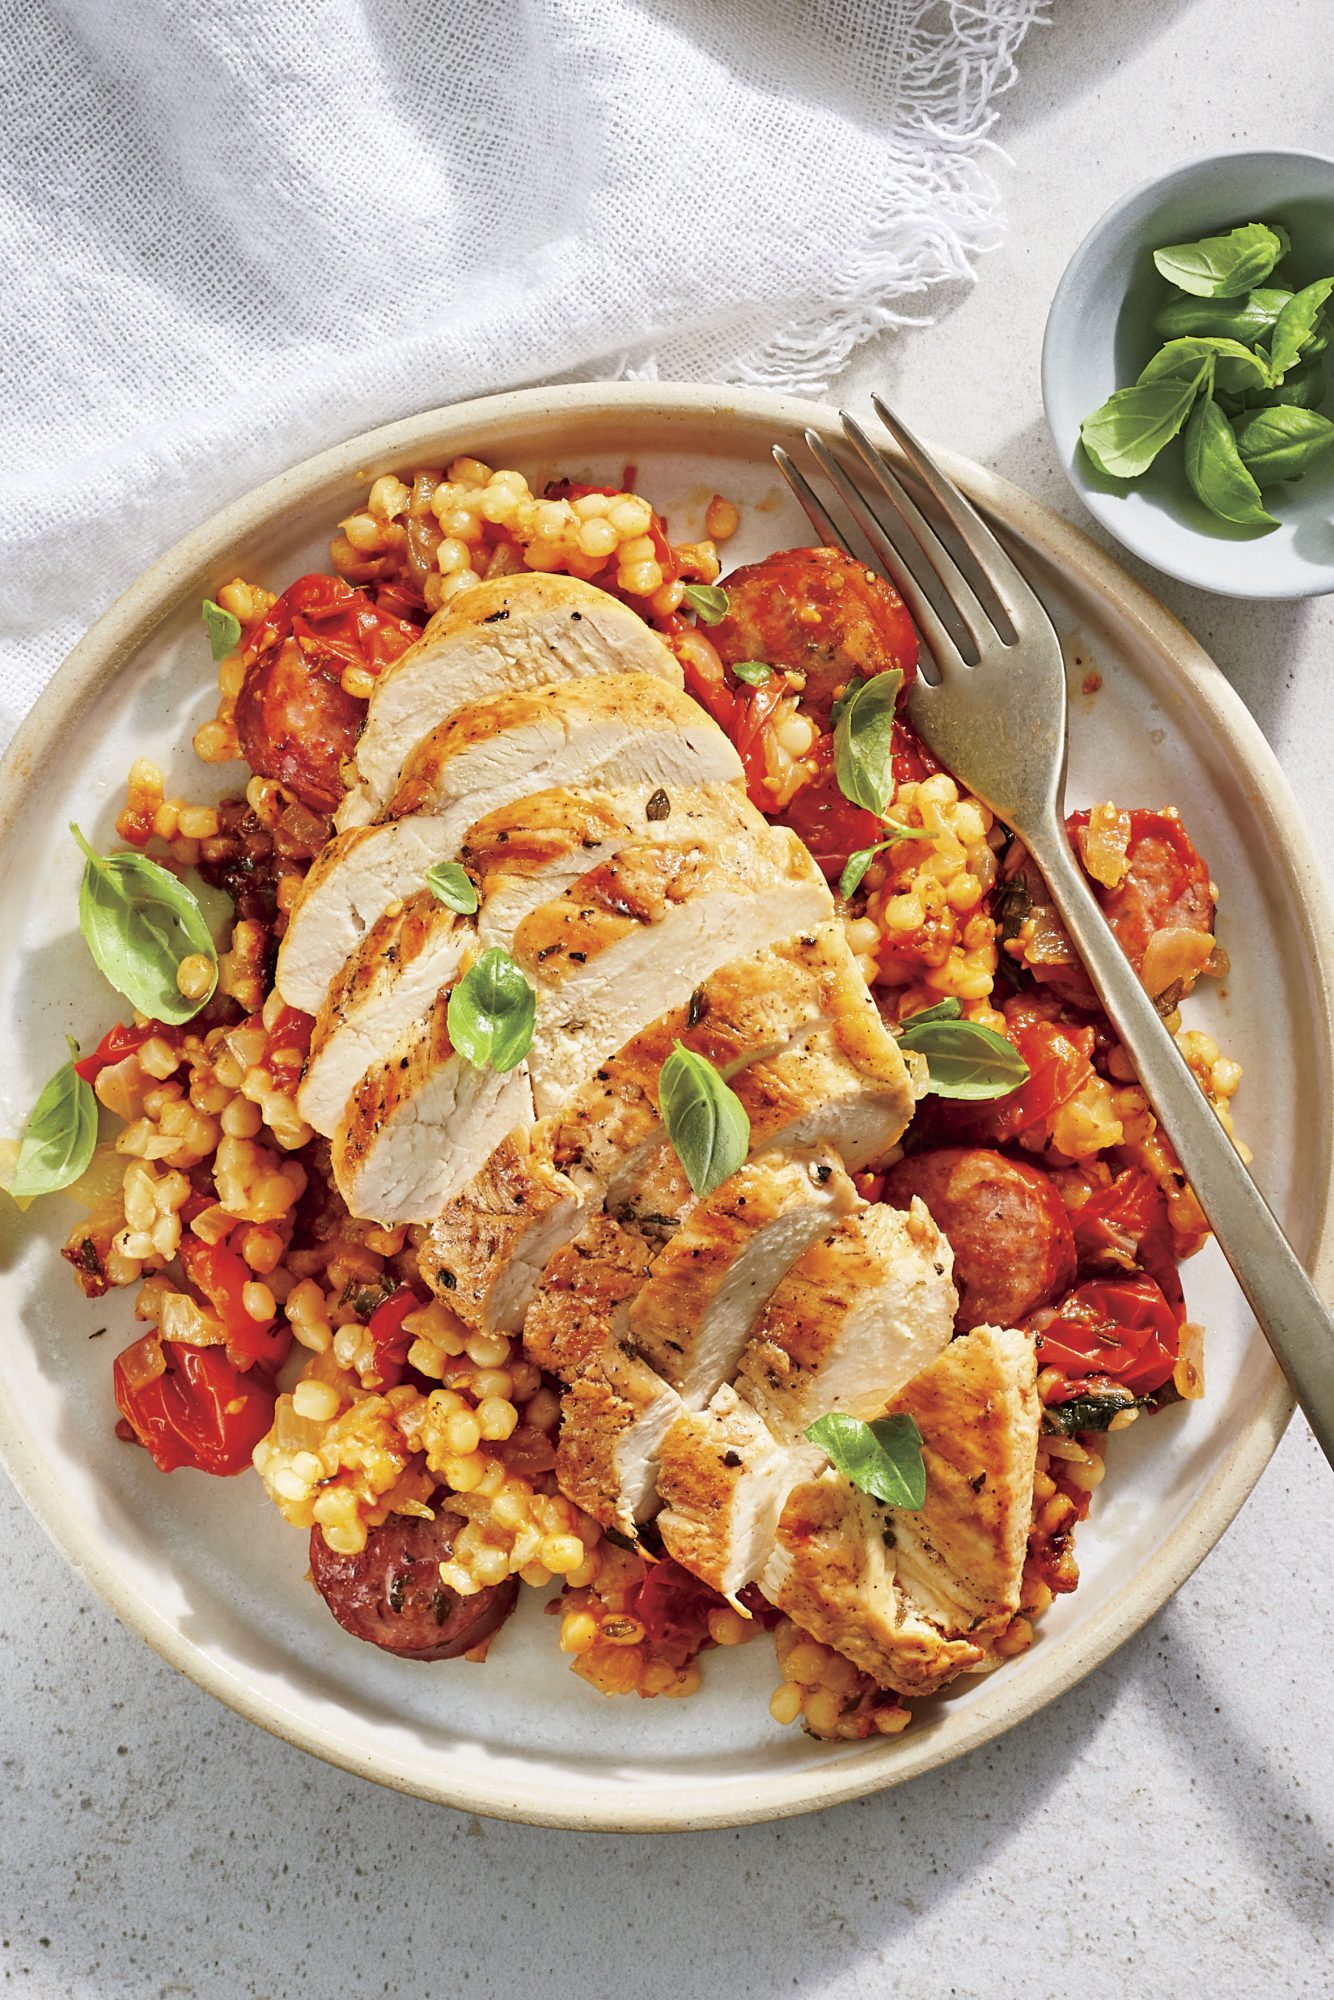 Tomato-Basil Couscous with Chicken and Smoked Sausage